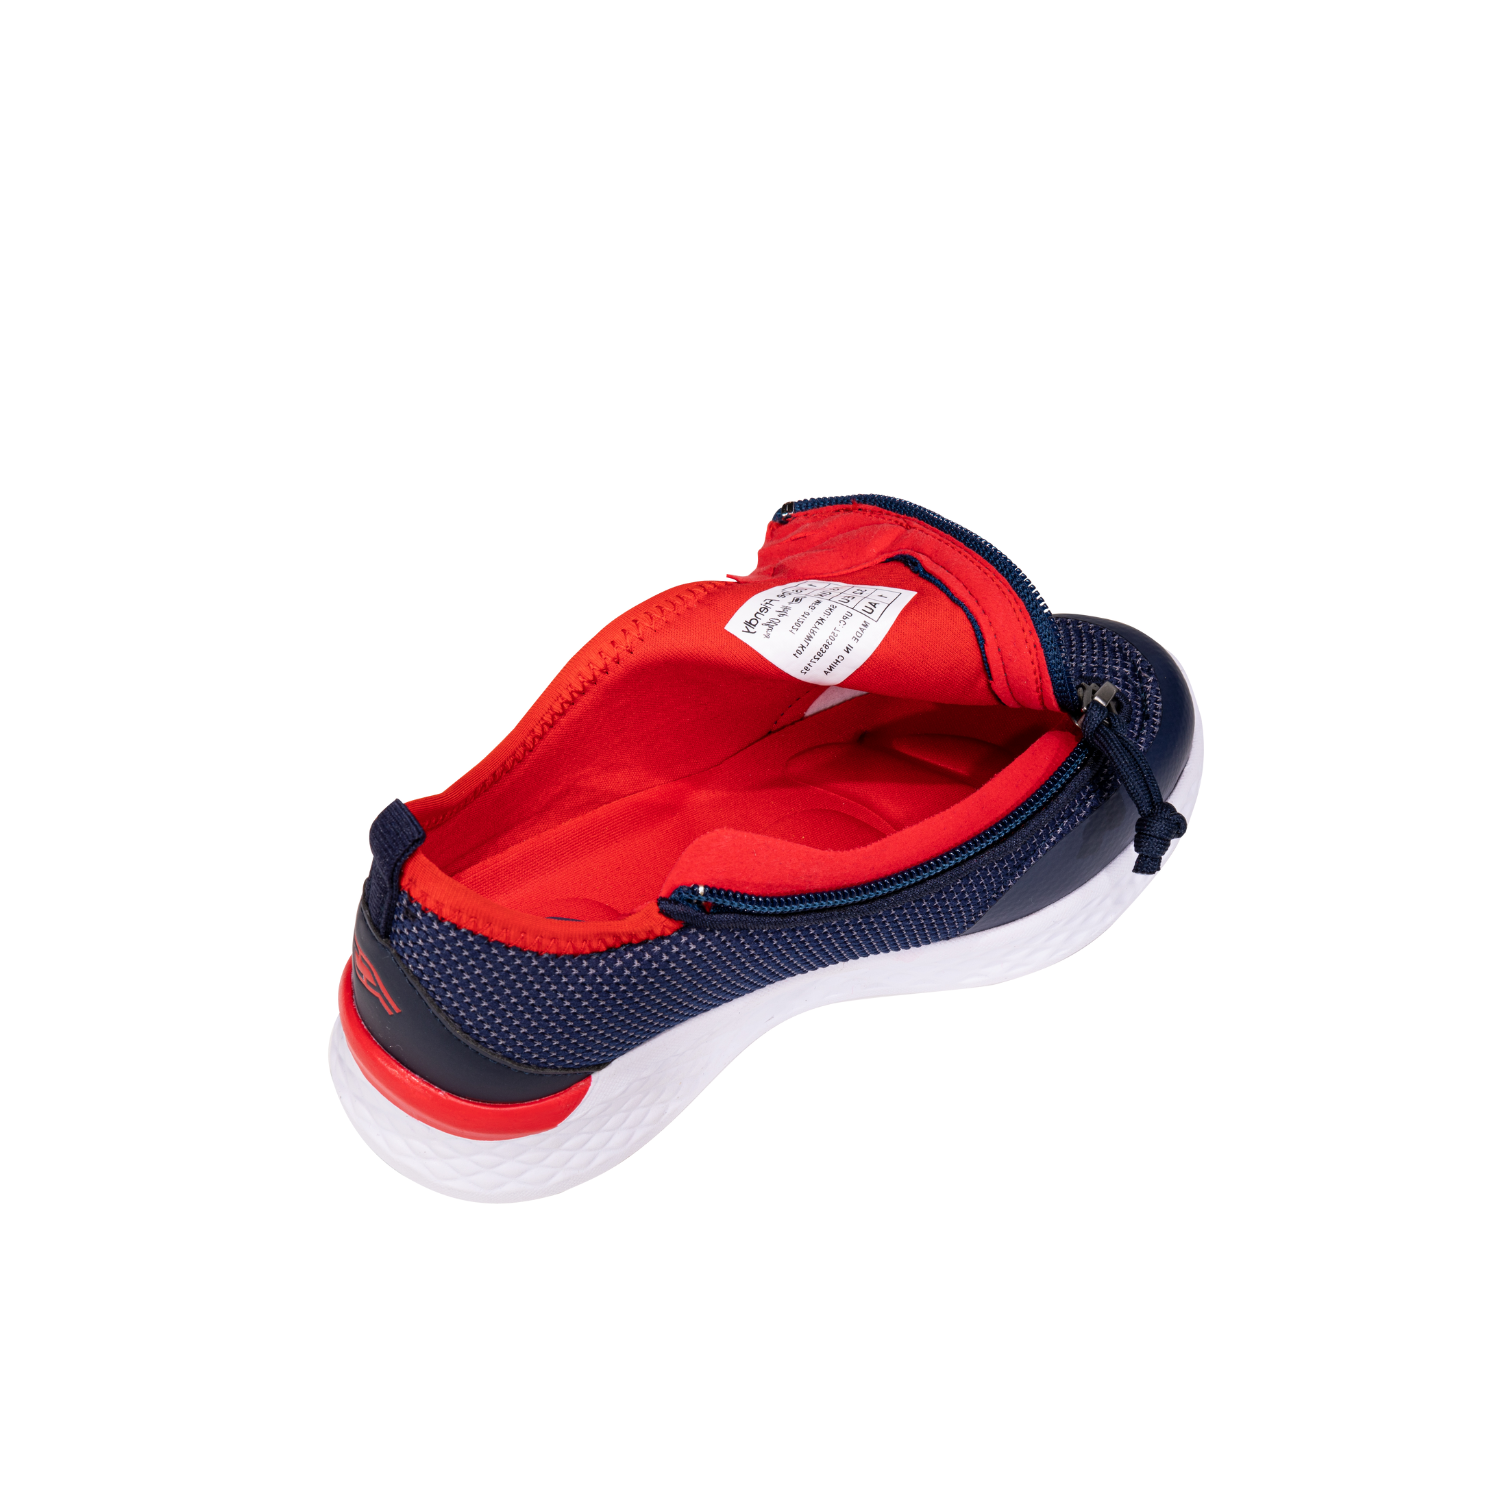 Boys navy red zippered shoes zipper opened